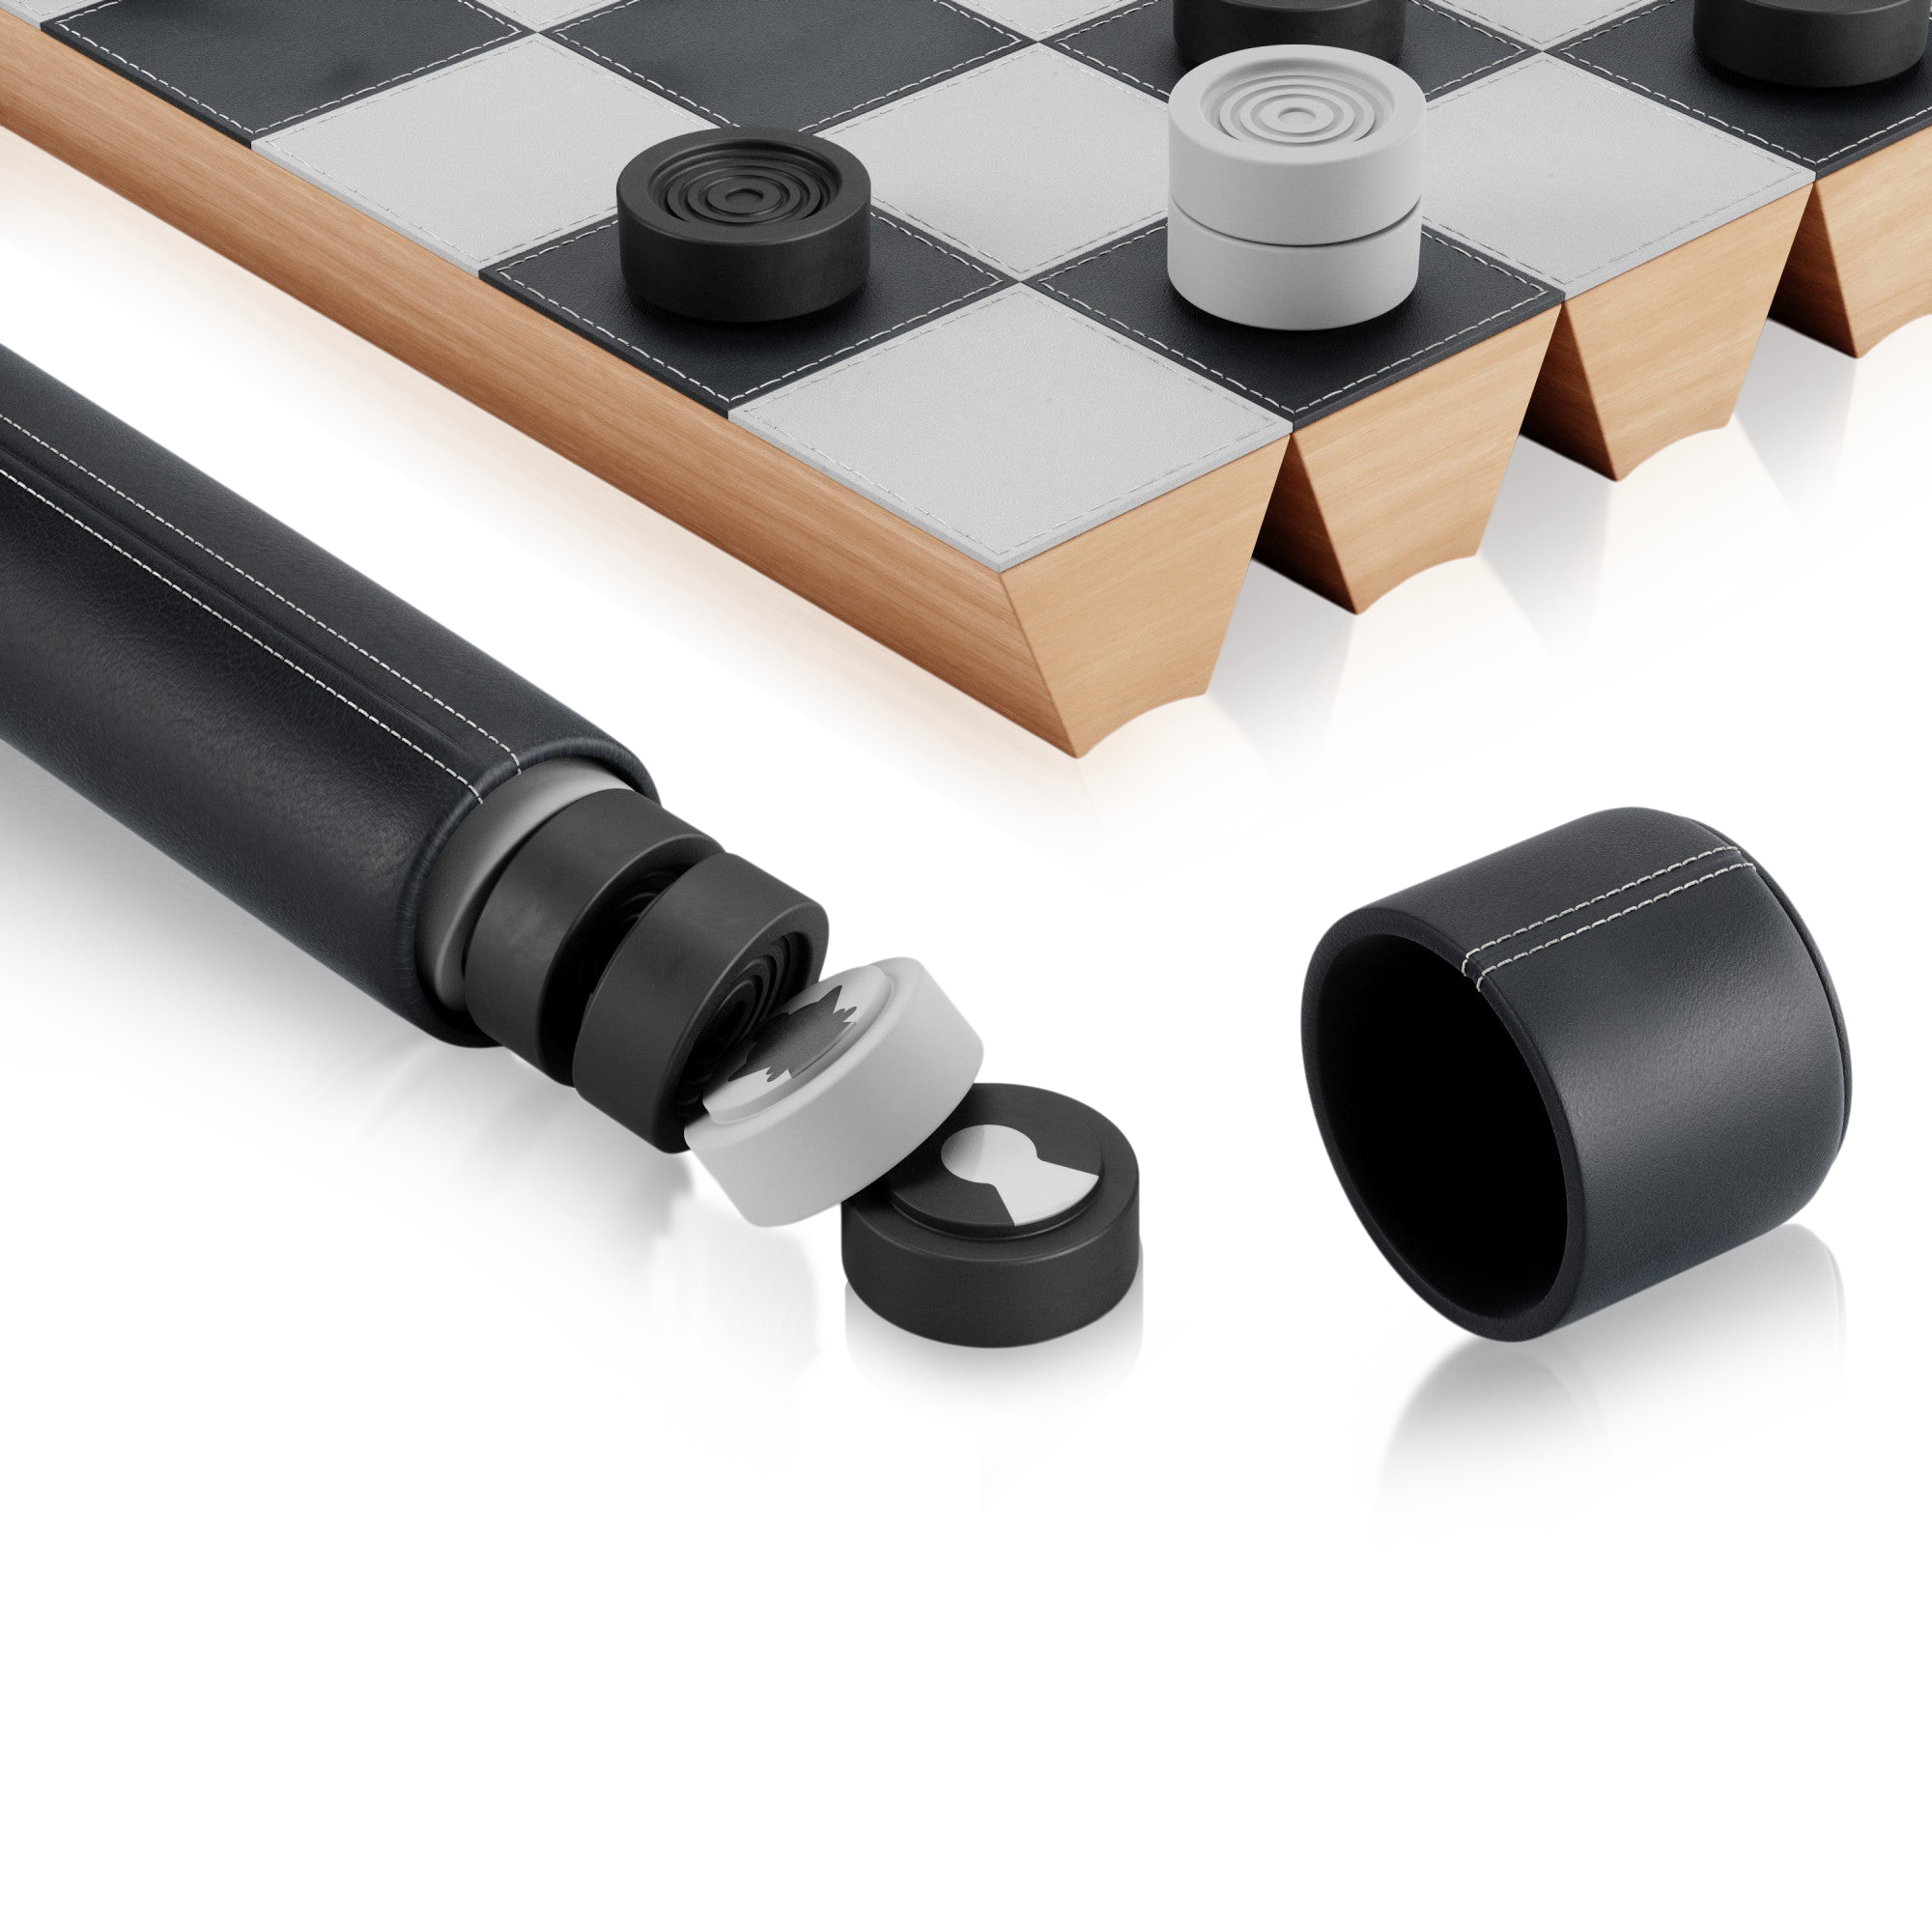 Rolz Chess and Checkers Set